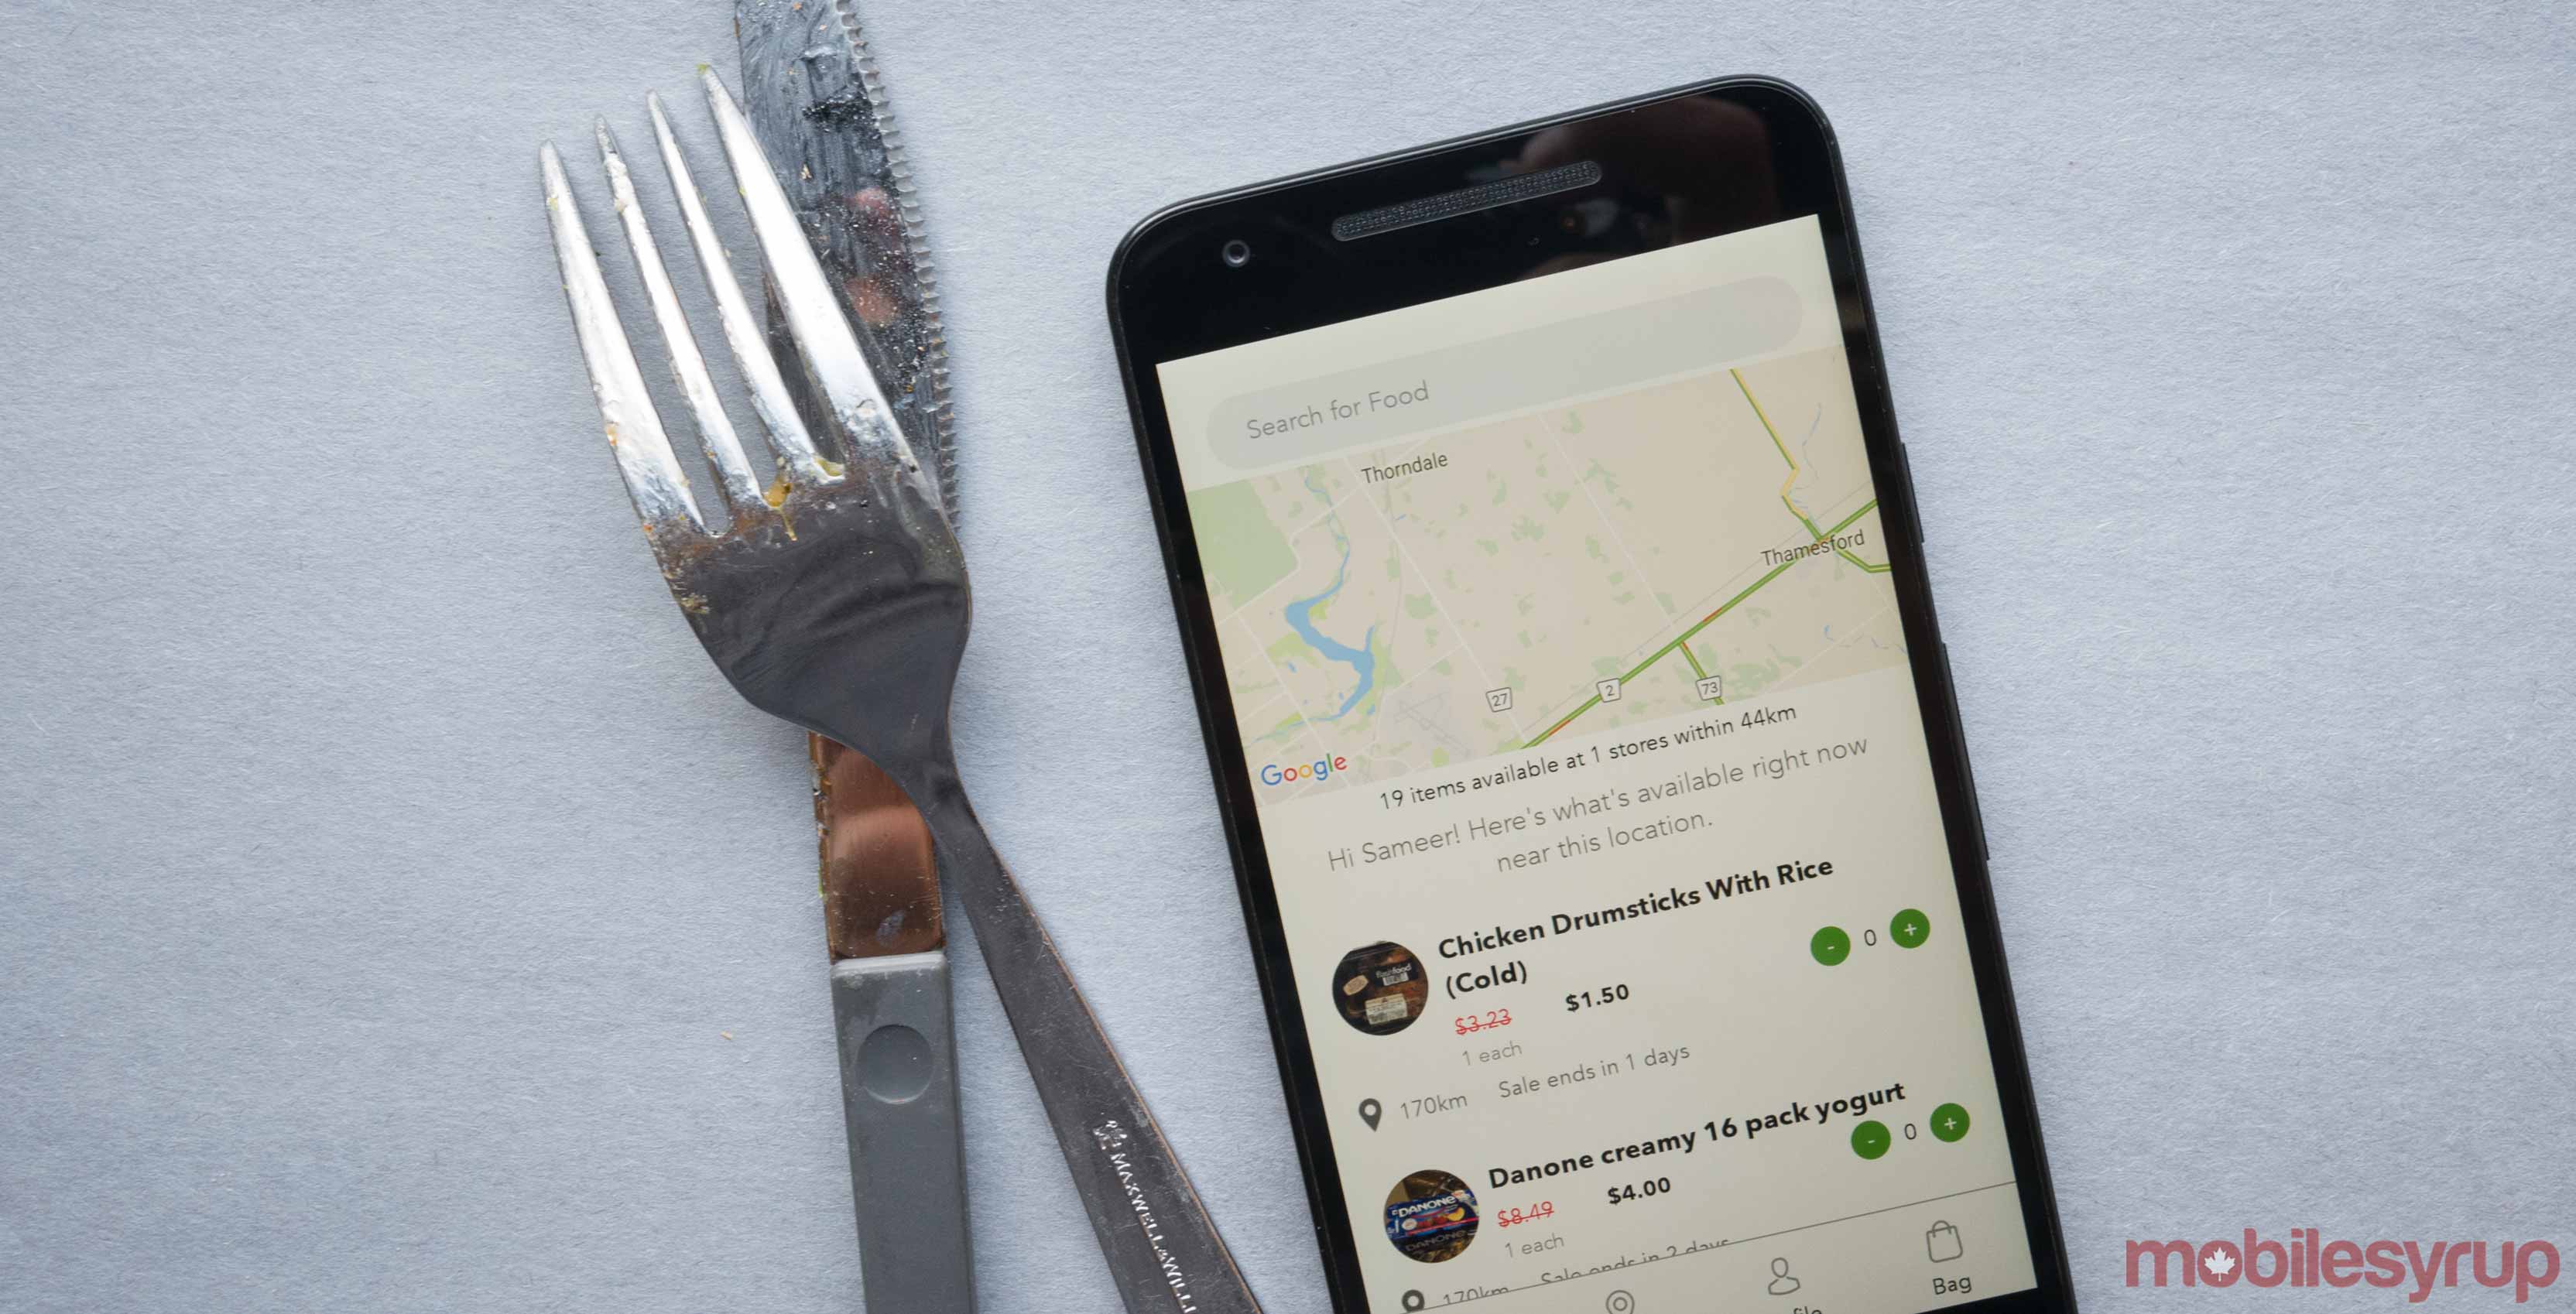 Image of Flashfood app next to a fork and knife